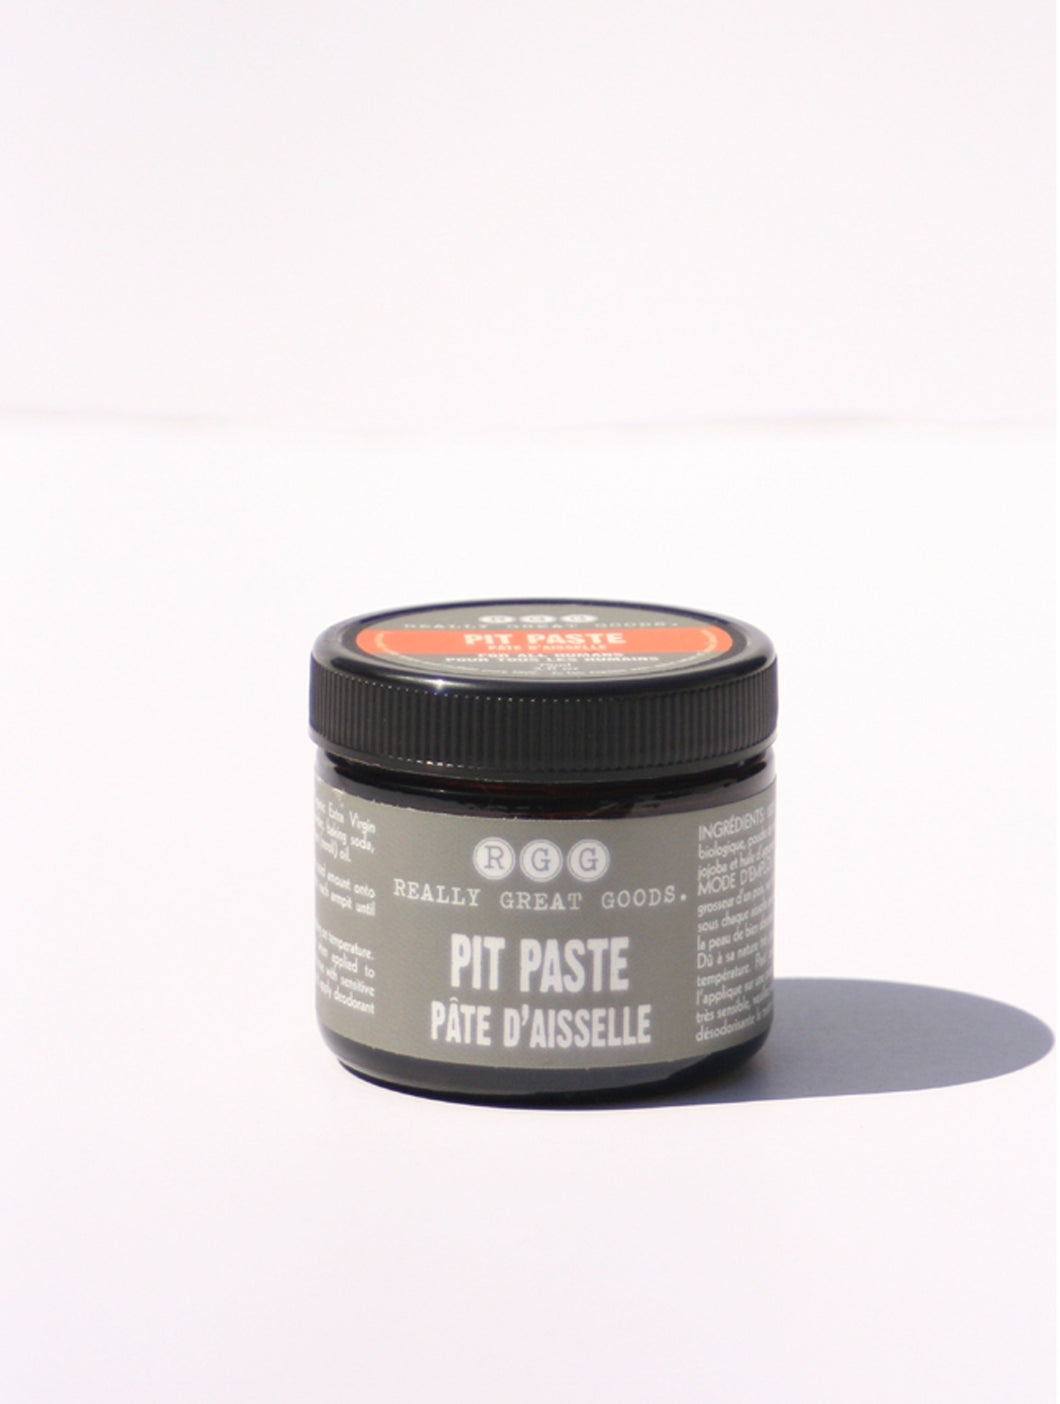 ALL NATURAL PIT PASTE by Really Great Goods